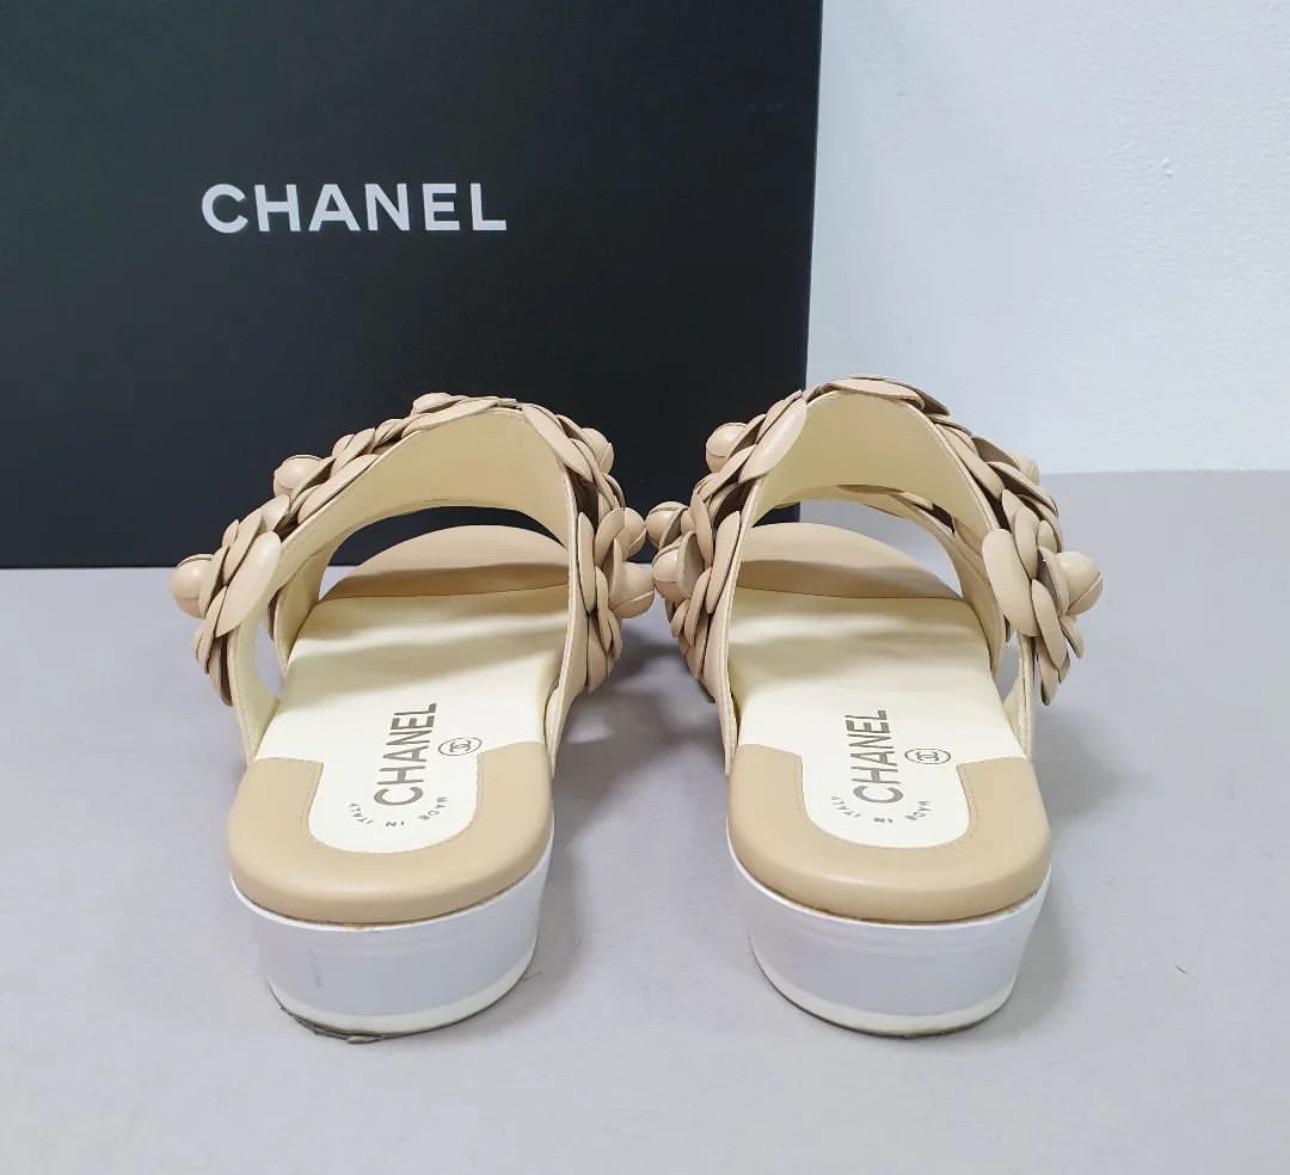 Chanel Beige Leather Camellia Mule Sandals Flip Flops In Good Condition For Sale In Krakow, PL